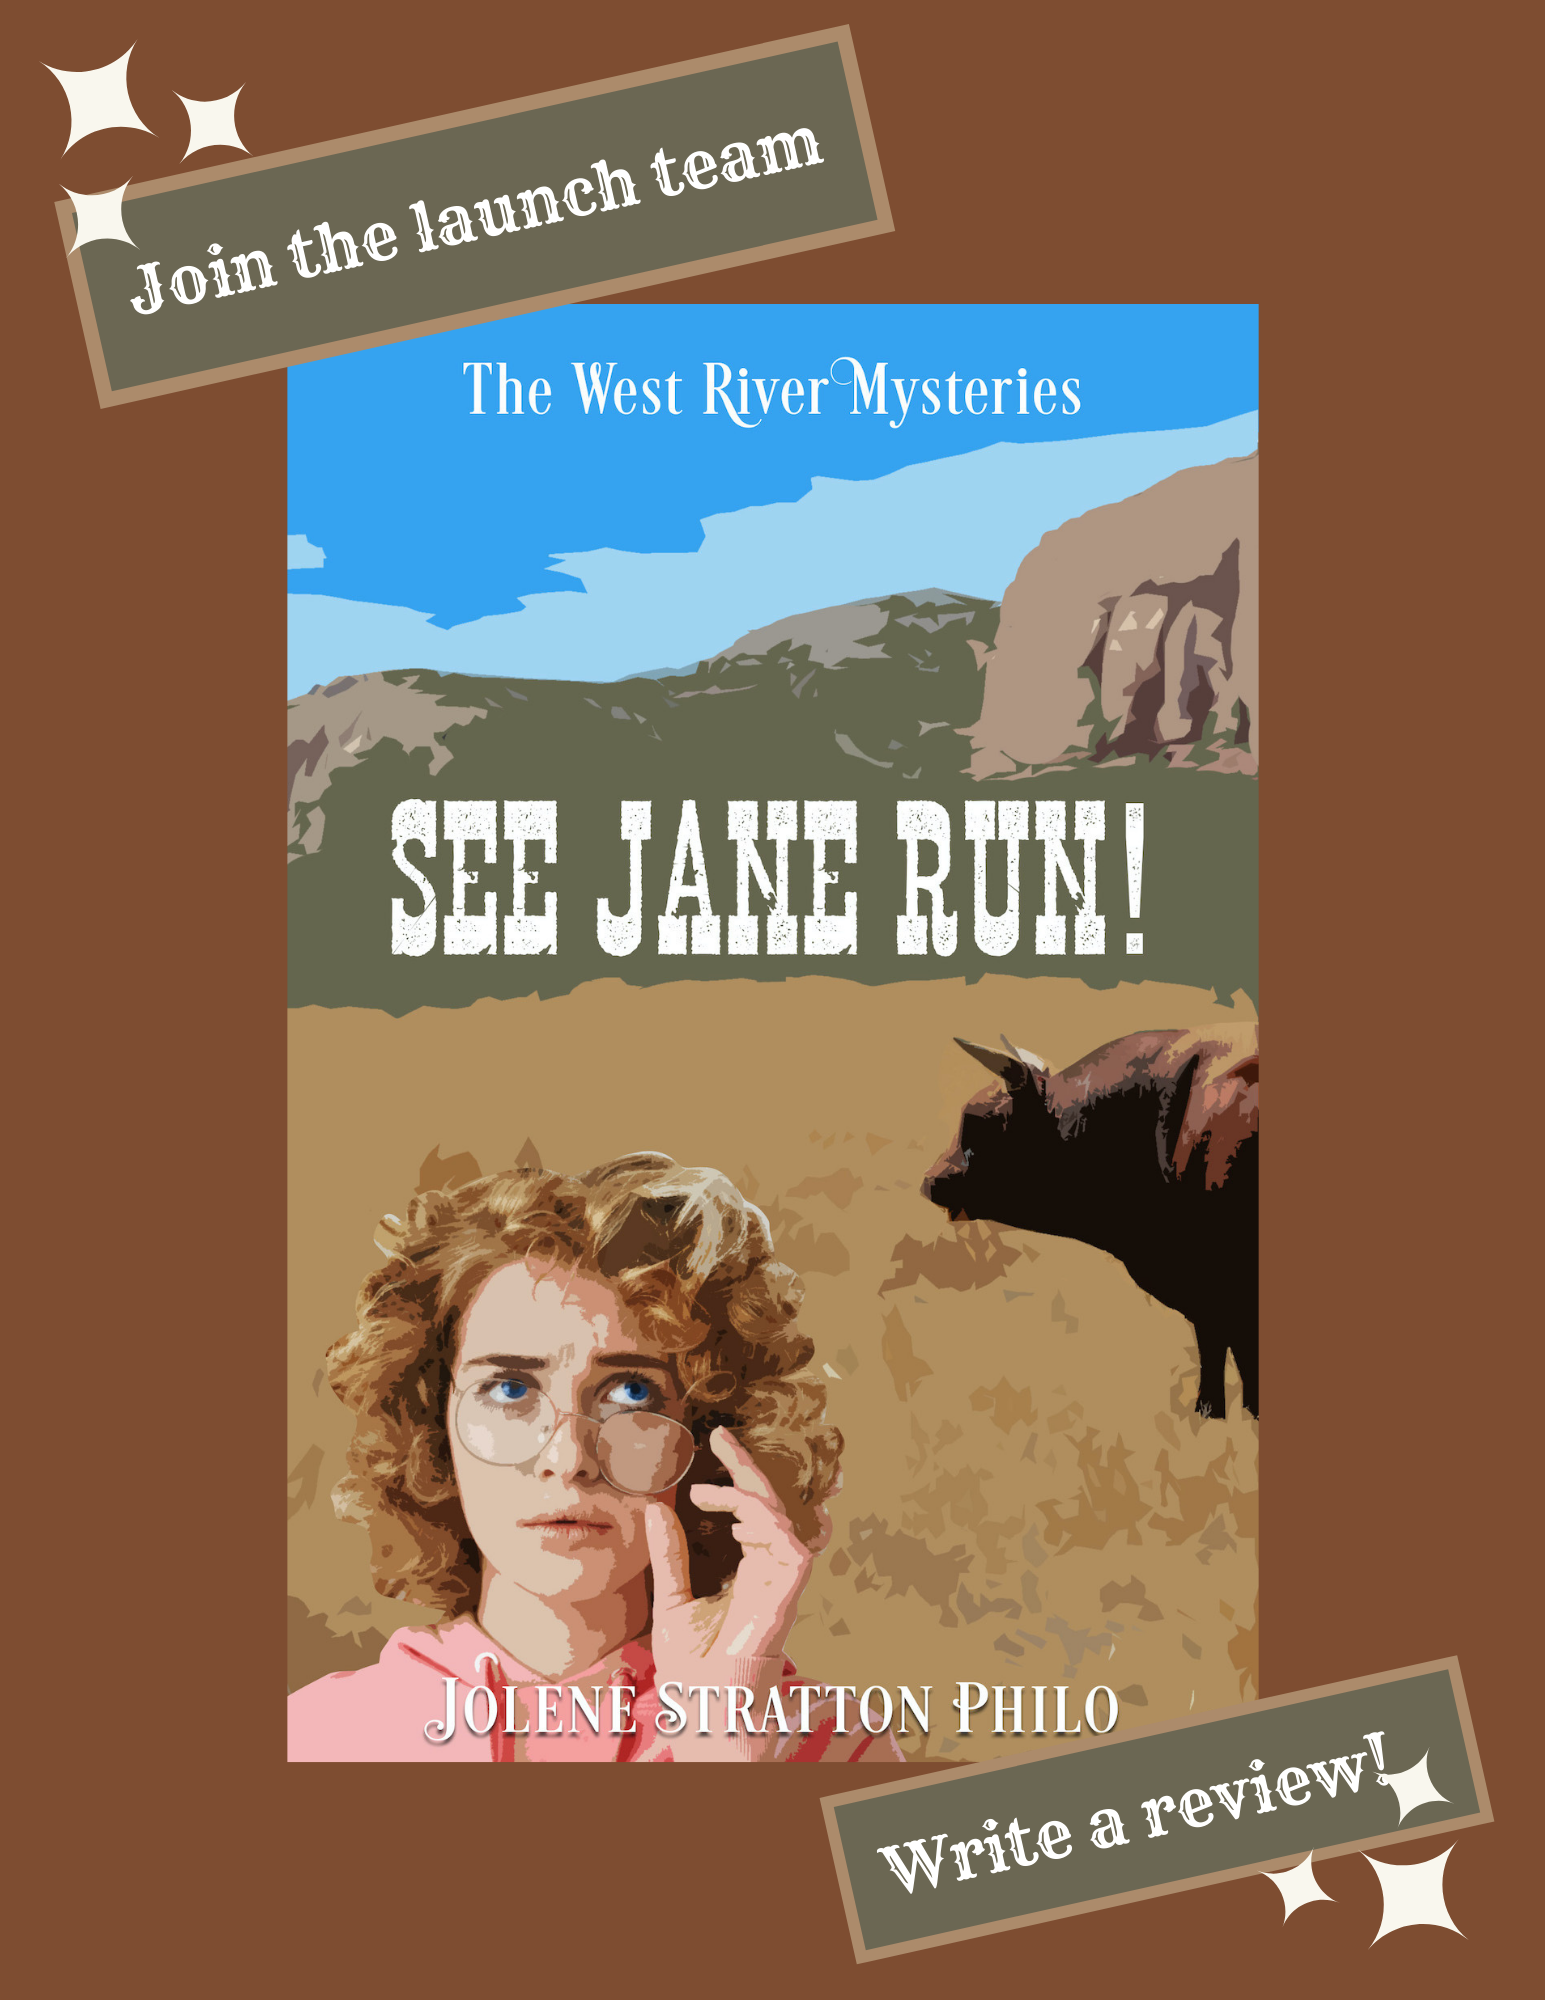 The release date for See Jane Run is less than a month away. You're invited to join the launch team, for which you'll receive a free book!